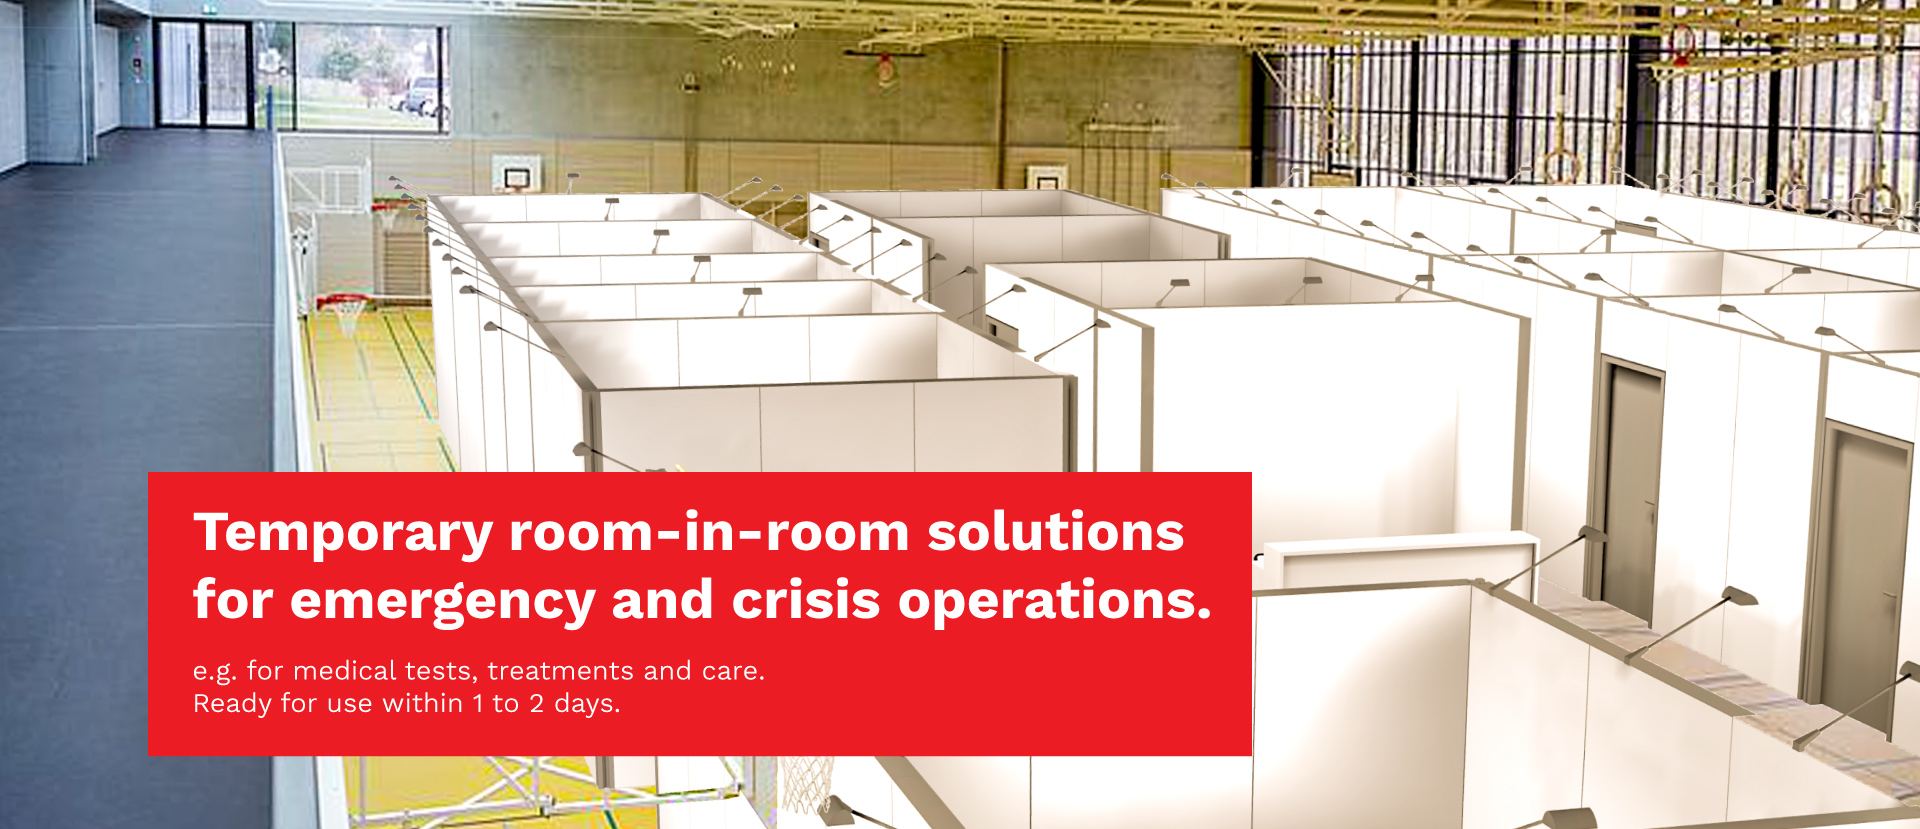 Temporary room-in-room solutions for emergency and crisis operations